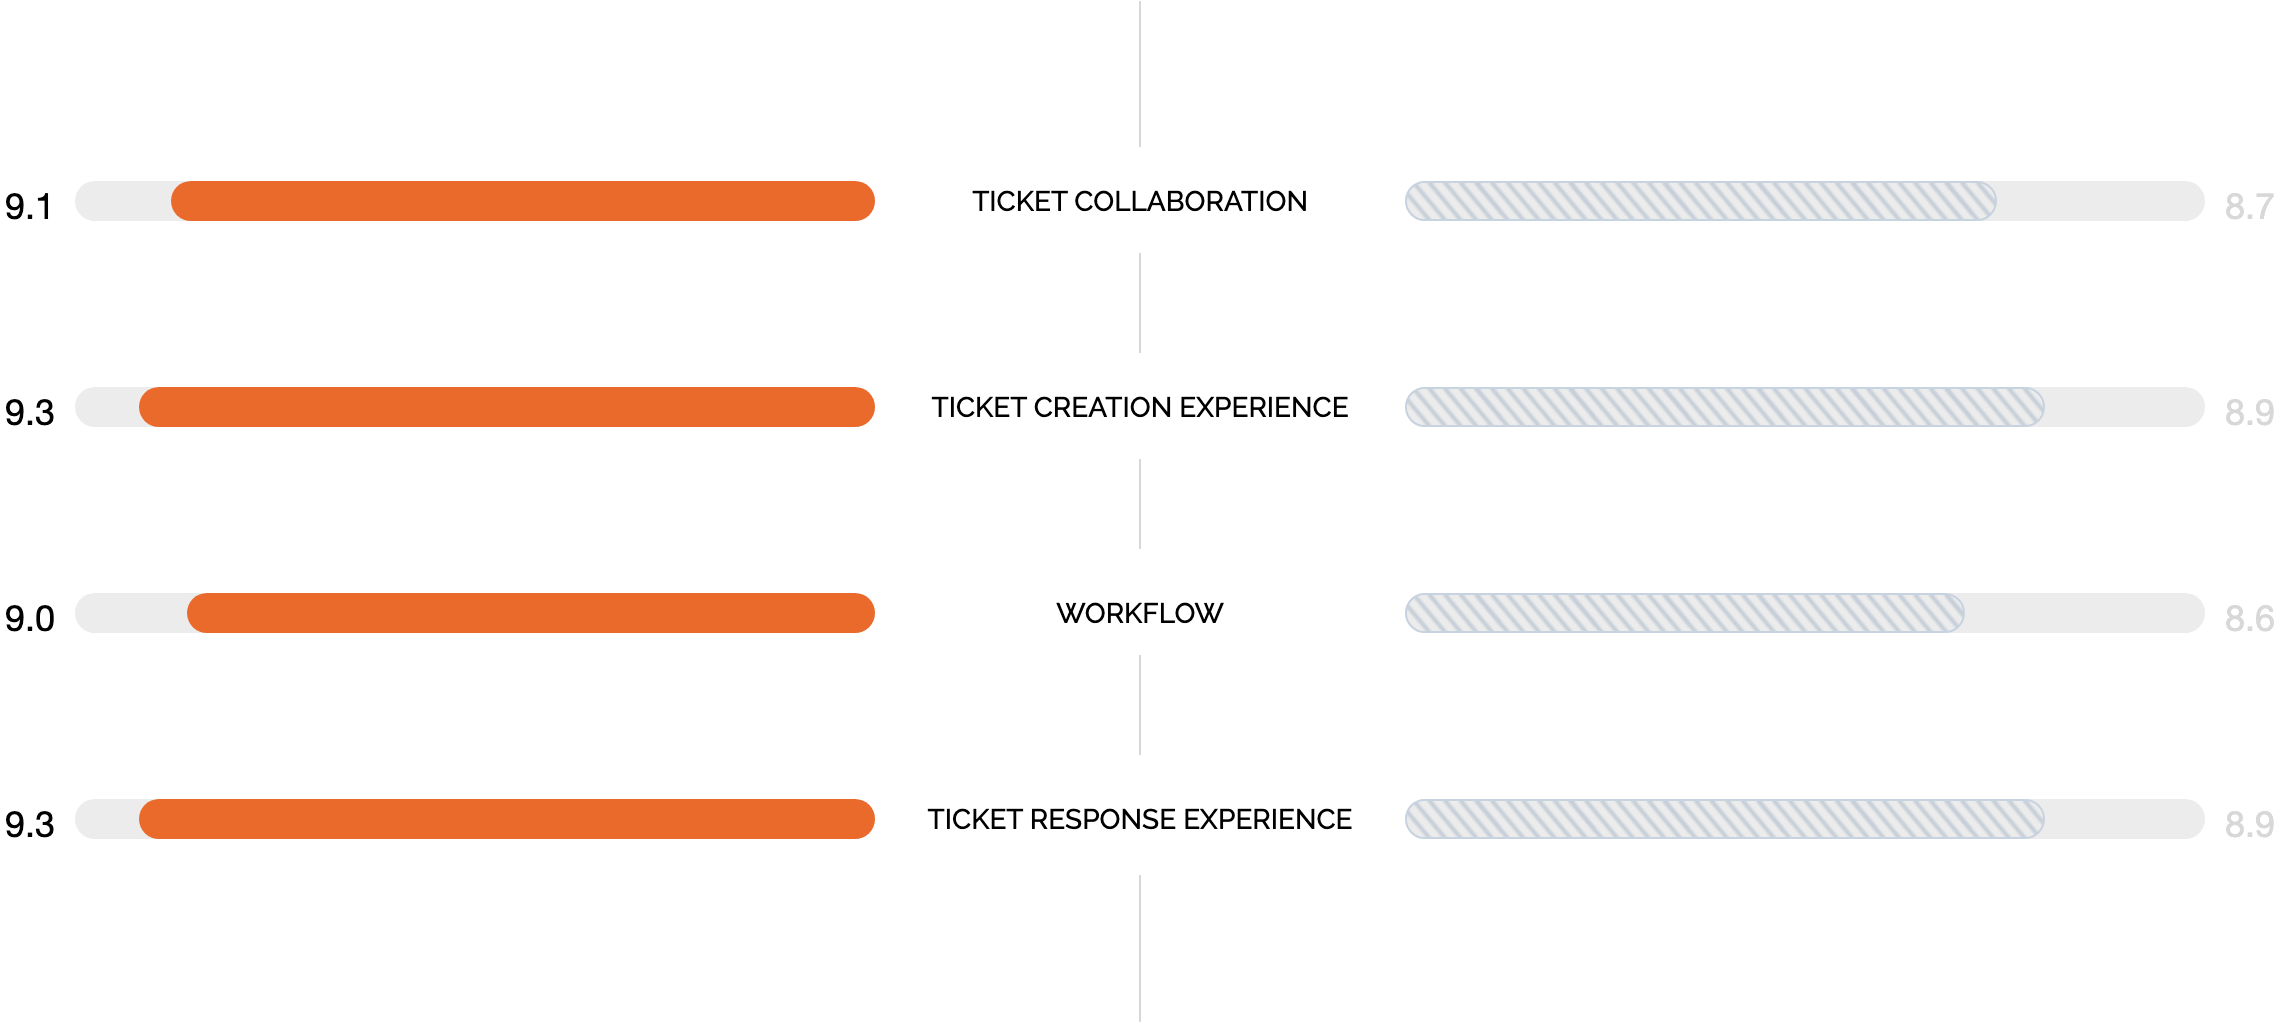 HappyFox vs Zendesk Support - Ticket collaboration, Ticket creation experience, workflow and Ticket response experience